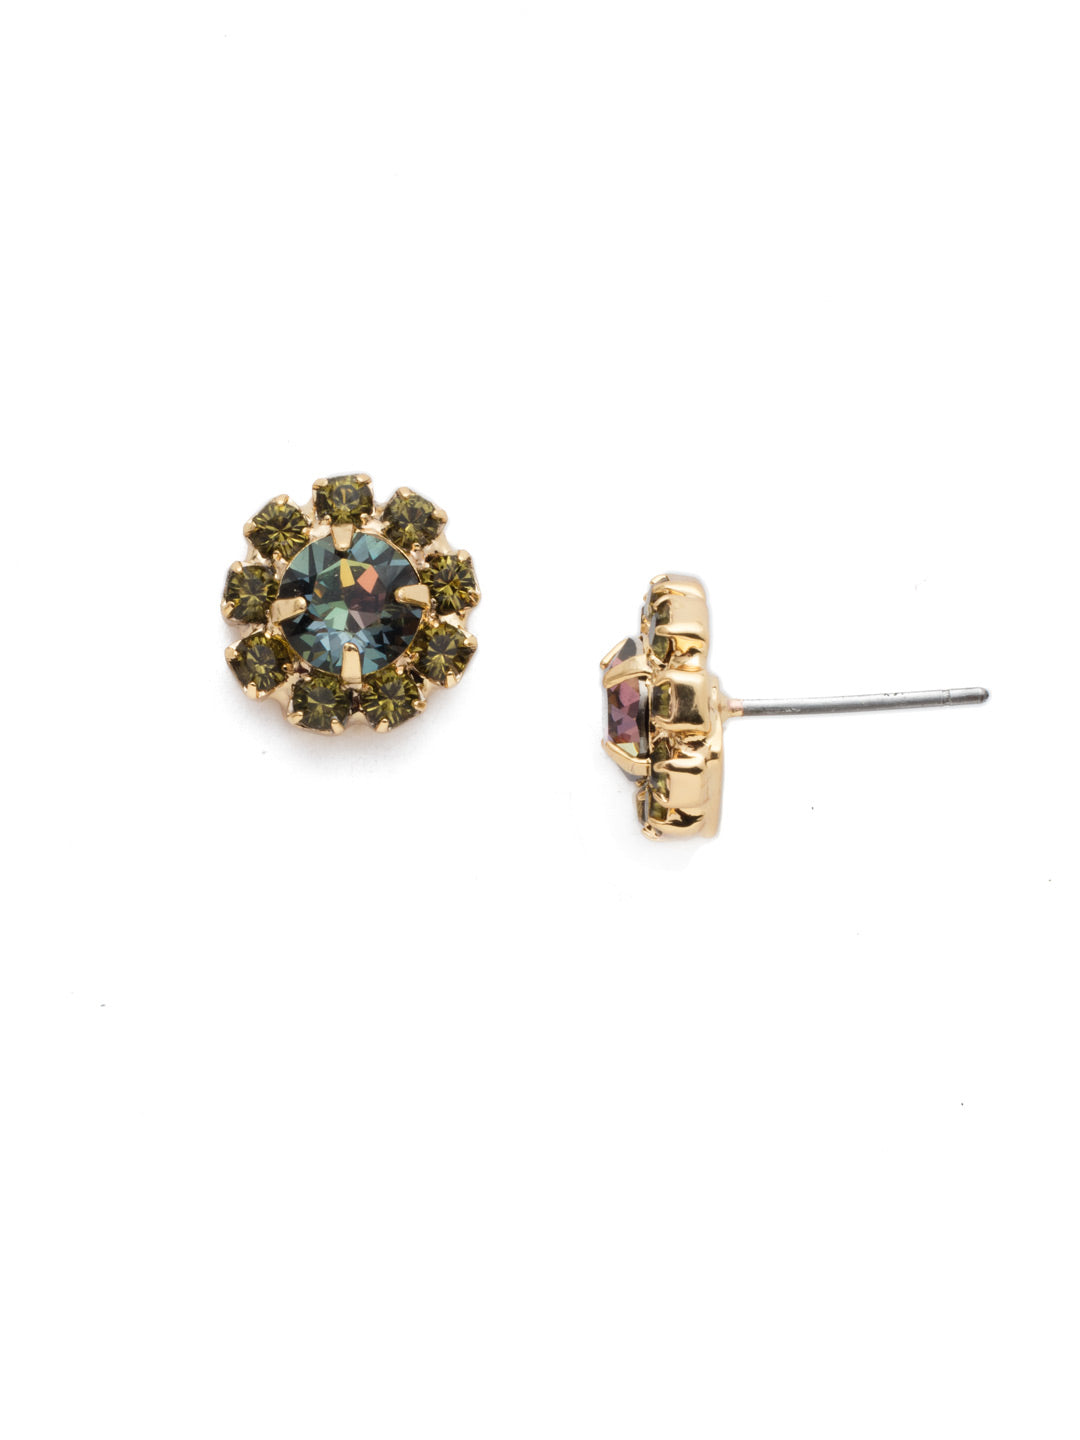 Best Bud Stud Earrings - EDM41BGCSM - This budding beauty features a nature-inspired design perfect for everyday wear. From Sorrelli's Cashmere collection in our Bright Gold-tone finish.